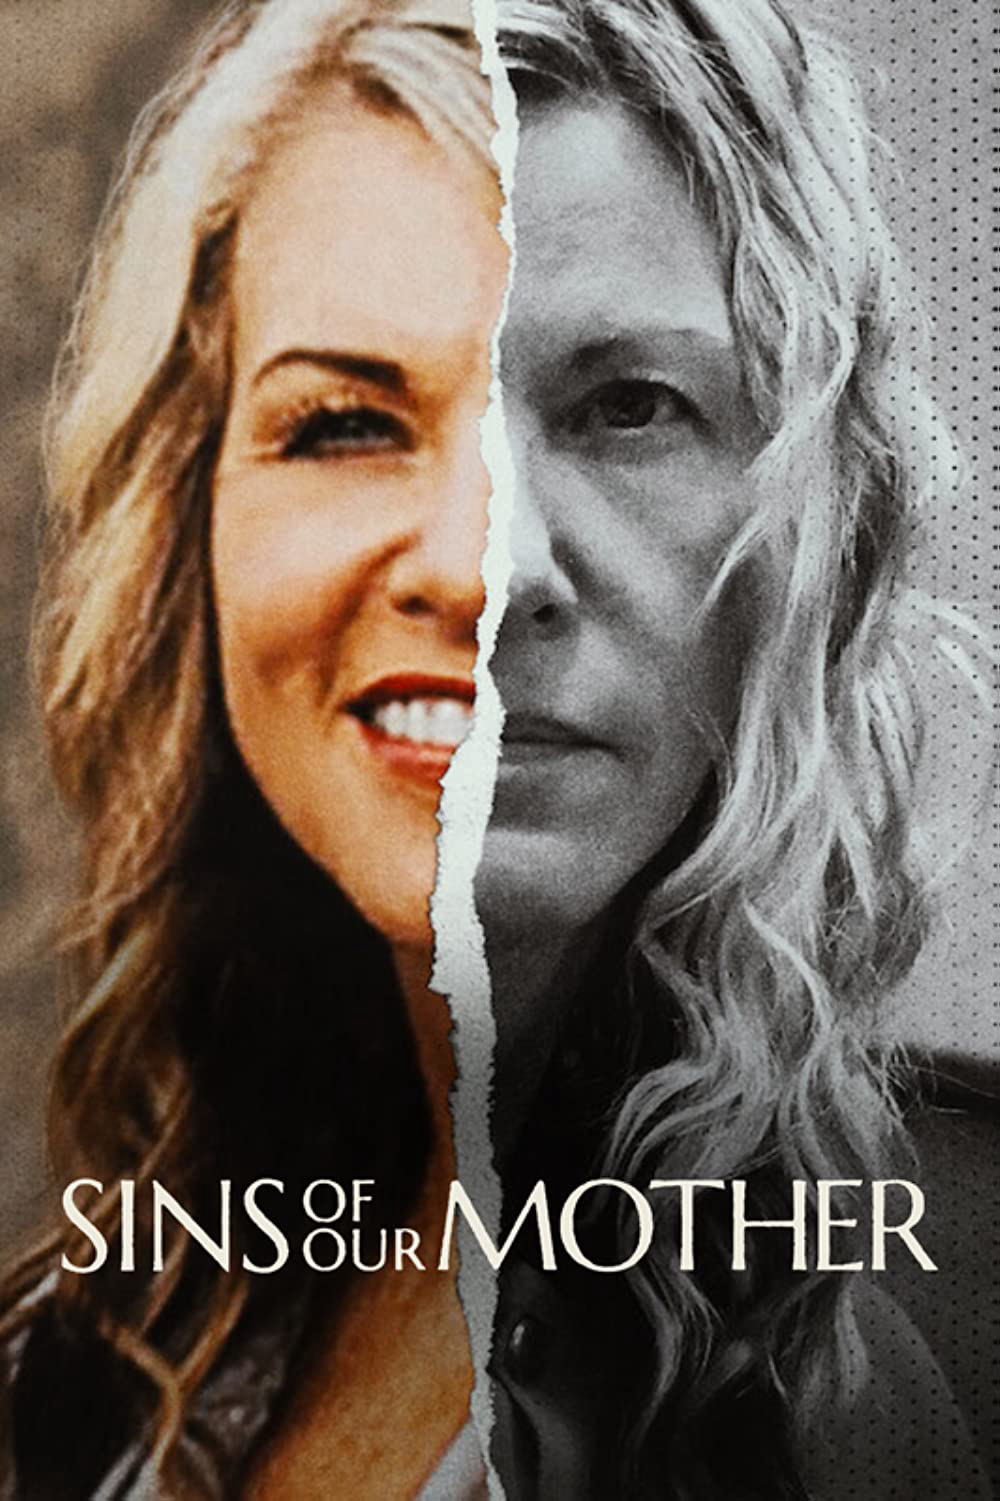 Poster Phim Tội lỗi của người mẹ (Sins of Our Mother)